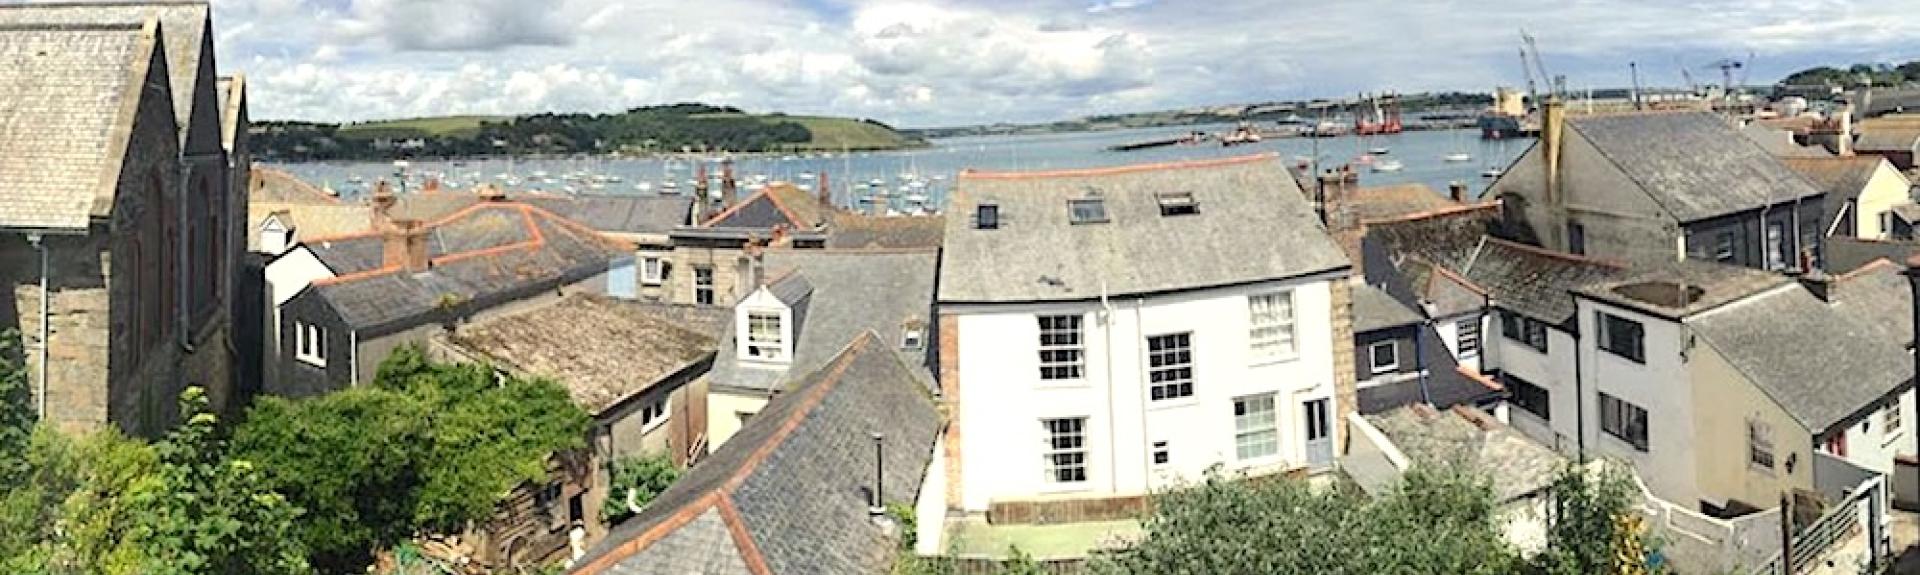 Aerial view of Marine Cottage in Falmouth looking across rooftops towards the sea.